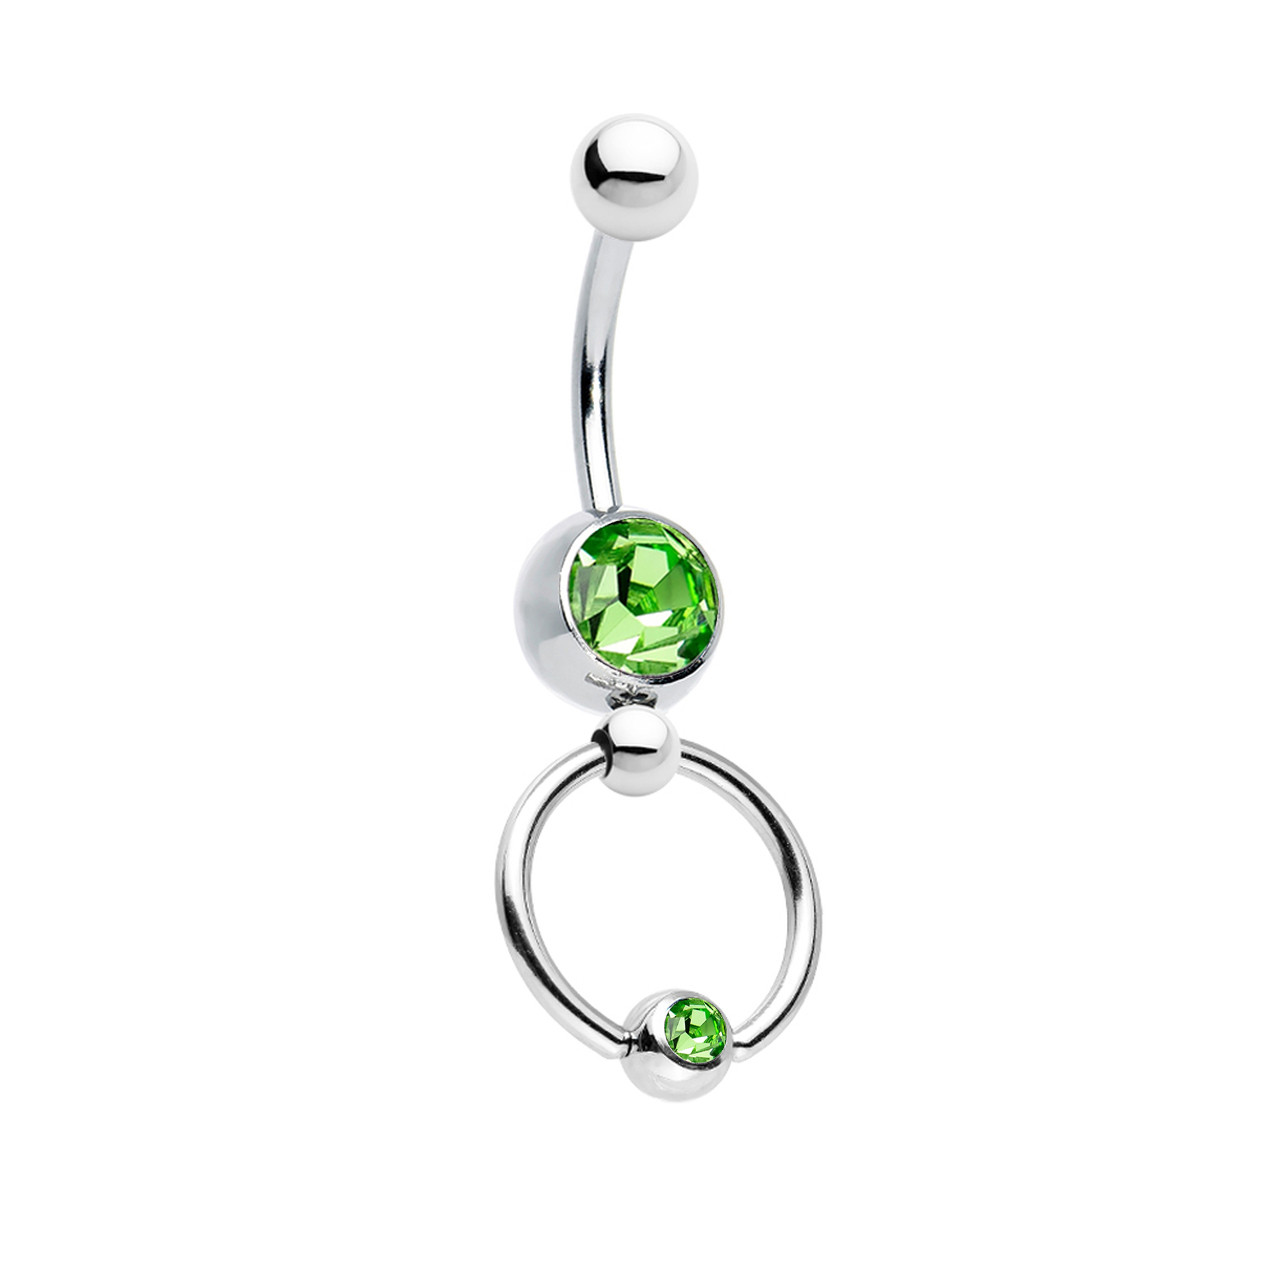 14ga Belly Ring - Door Knocker Style Captive Bead Ring with CZ